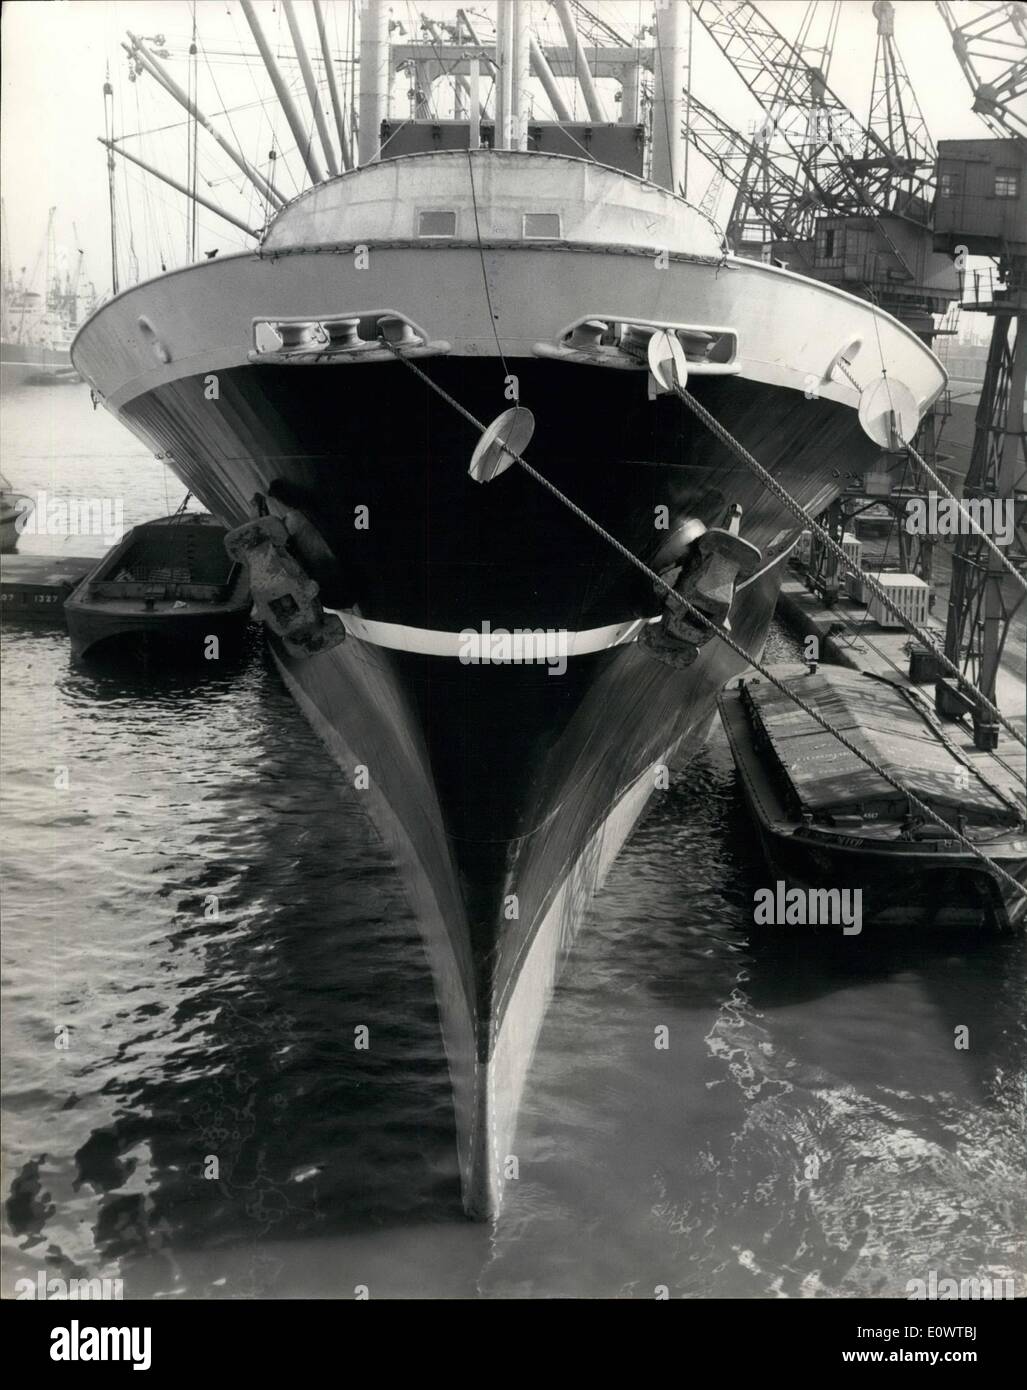 Feb. 27, 1964 - 27-2-64 The ship with the controversial bottom. A recent arrival at the London docks is the new Japanese cargo ship the Yamashiro Maru which has completed her maiden voyage from Kobe. The ship, which was built by Mitsubishi of Nagasaki, has a broad beam, a bulbous bow, and a slender stem and stern. The builders claim that the characteristics which have been developed after years of research, give her more knots on less fuel than a conventional ship's hull Stock Photo